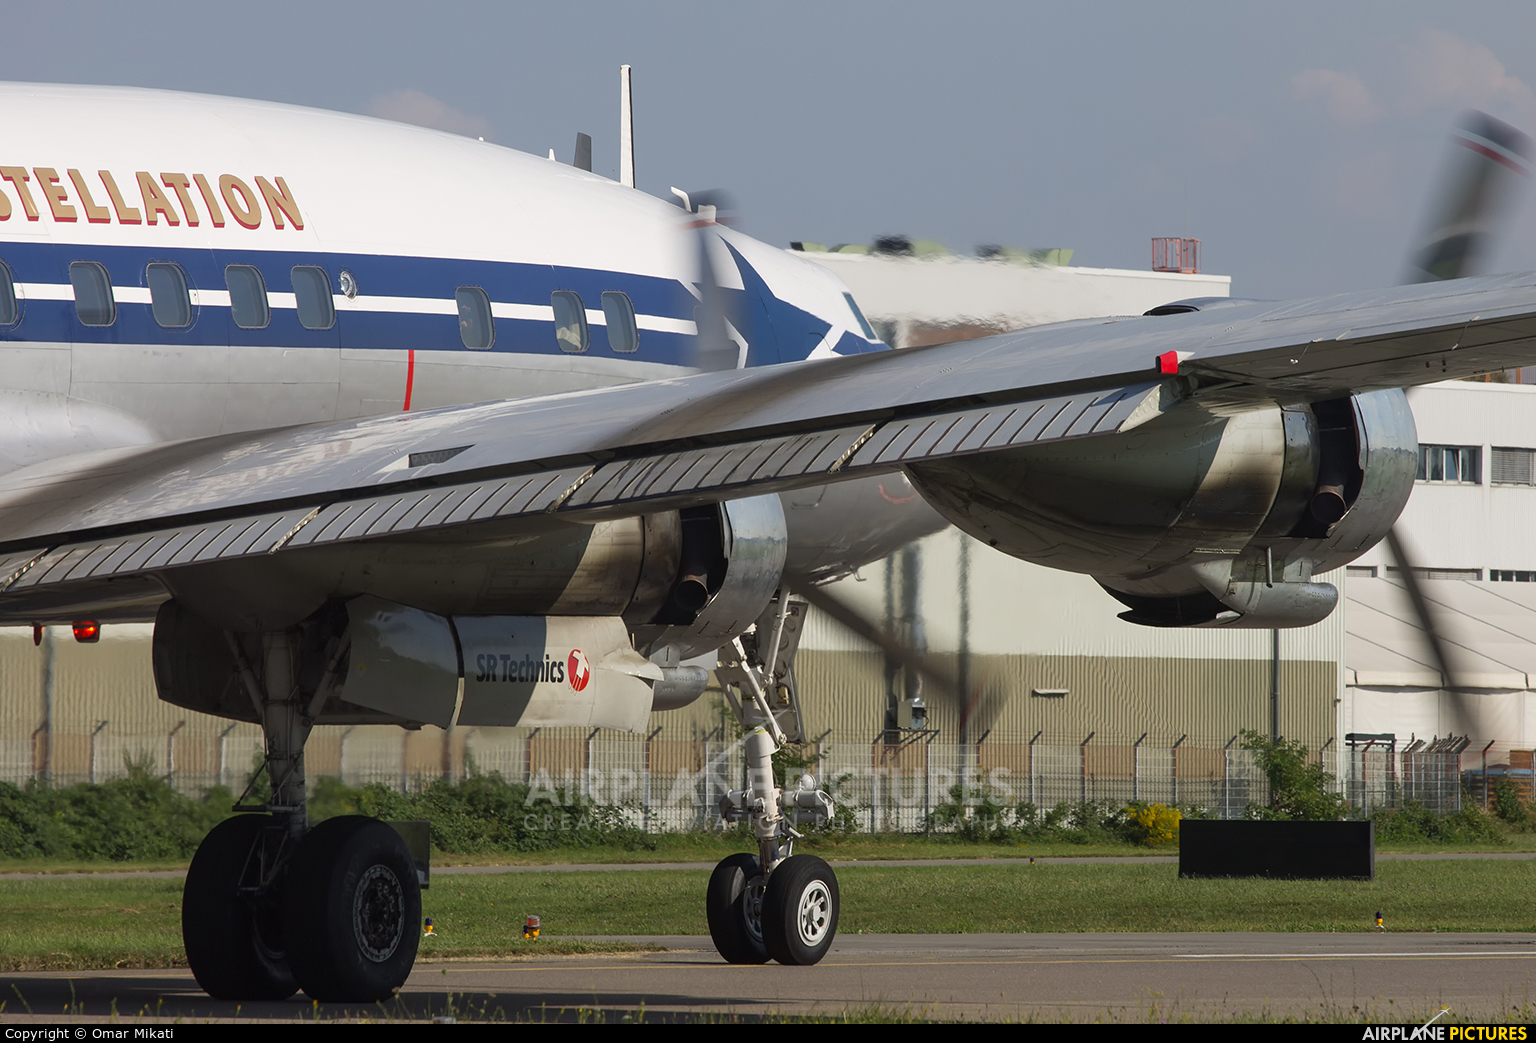 Super Constellation Flyers HB-RSC aircraft at Speyer Airport